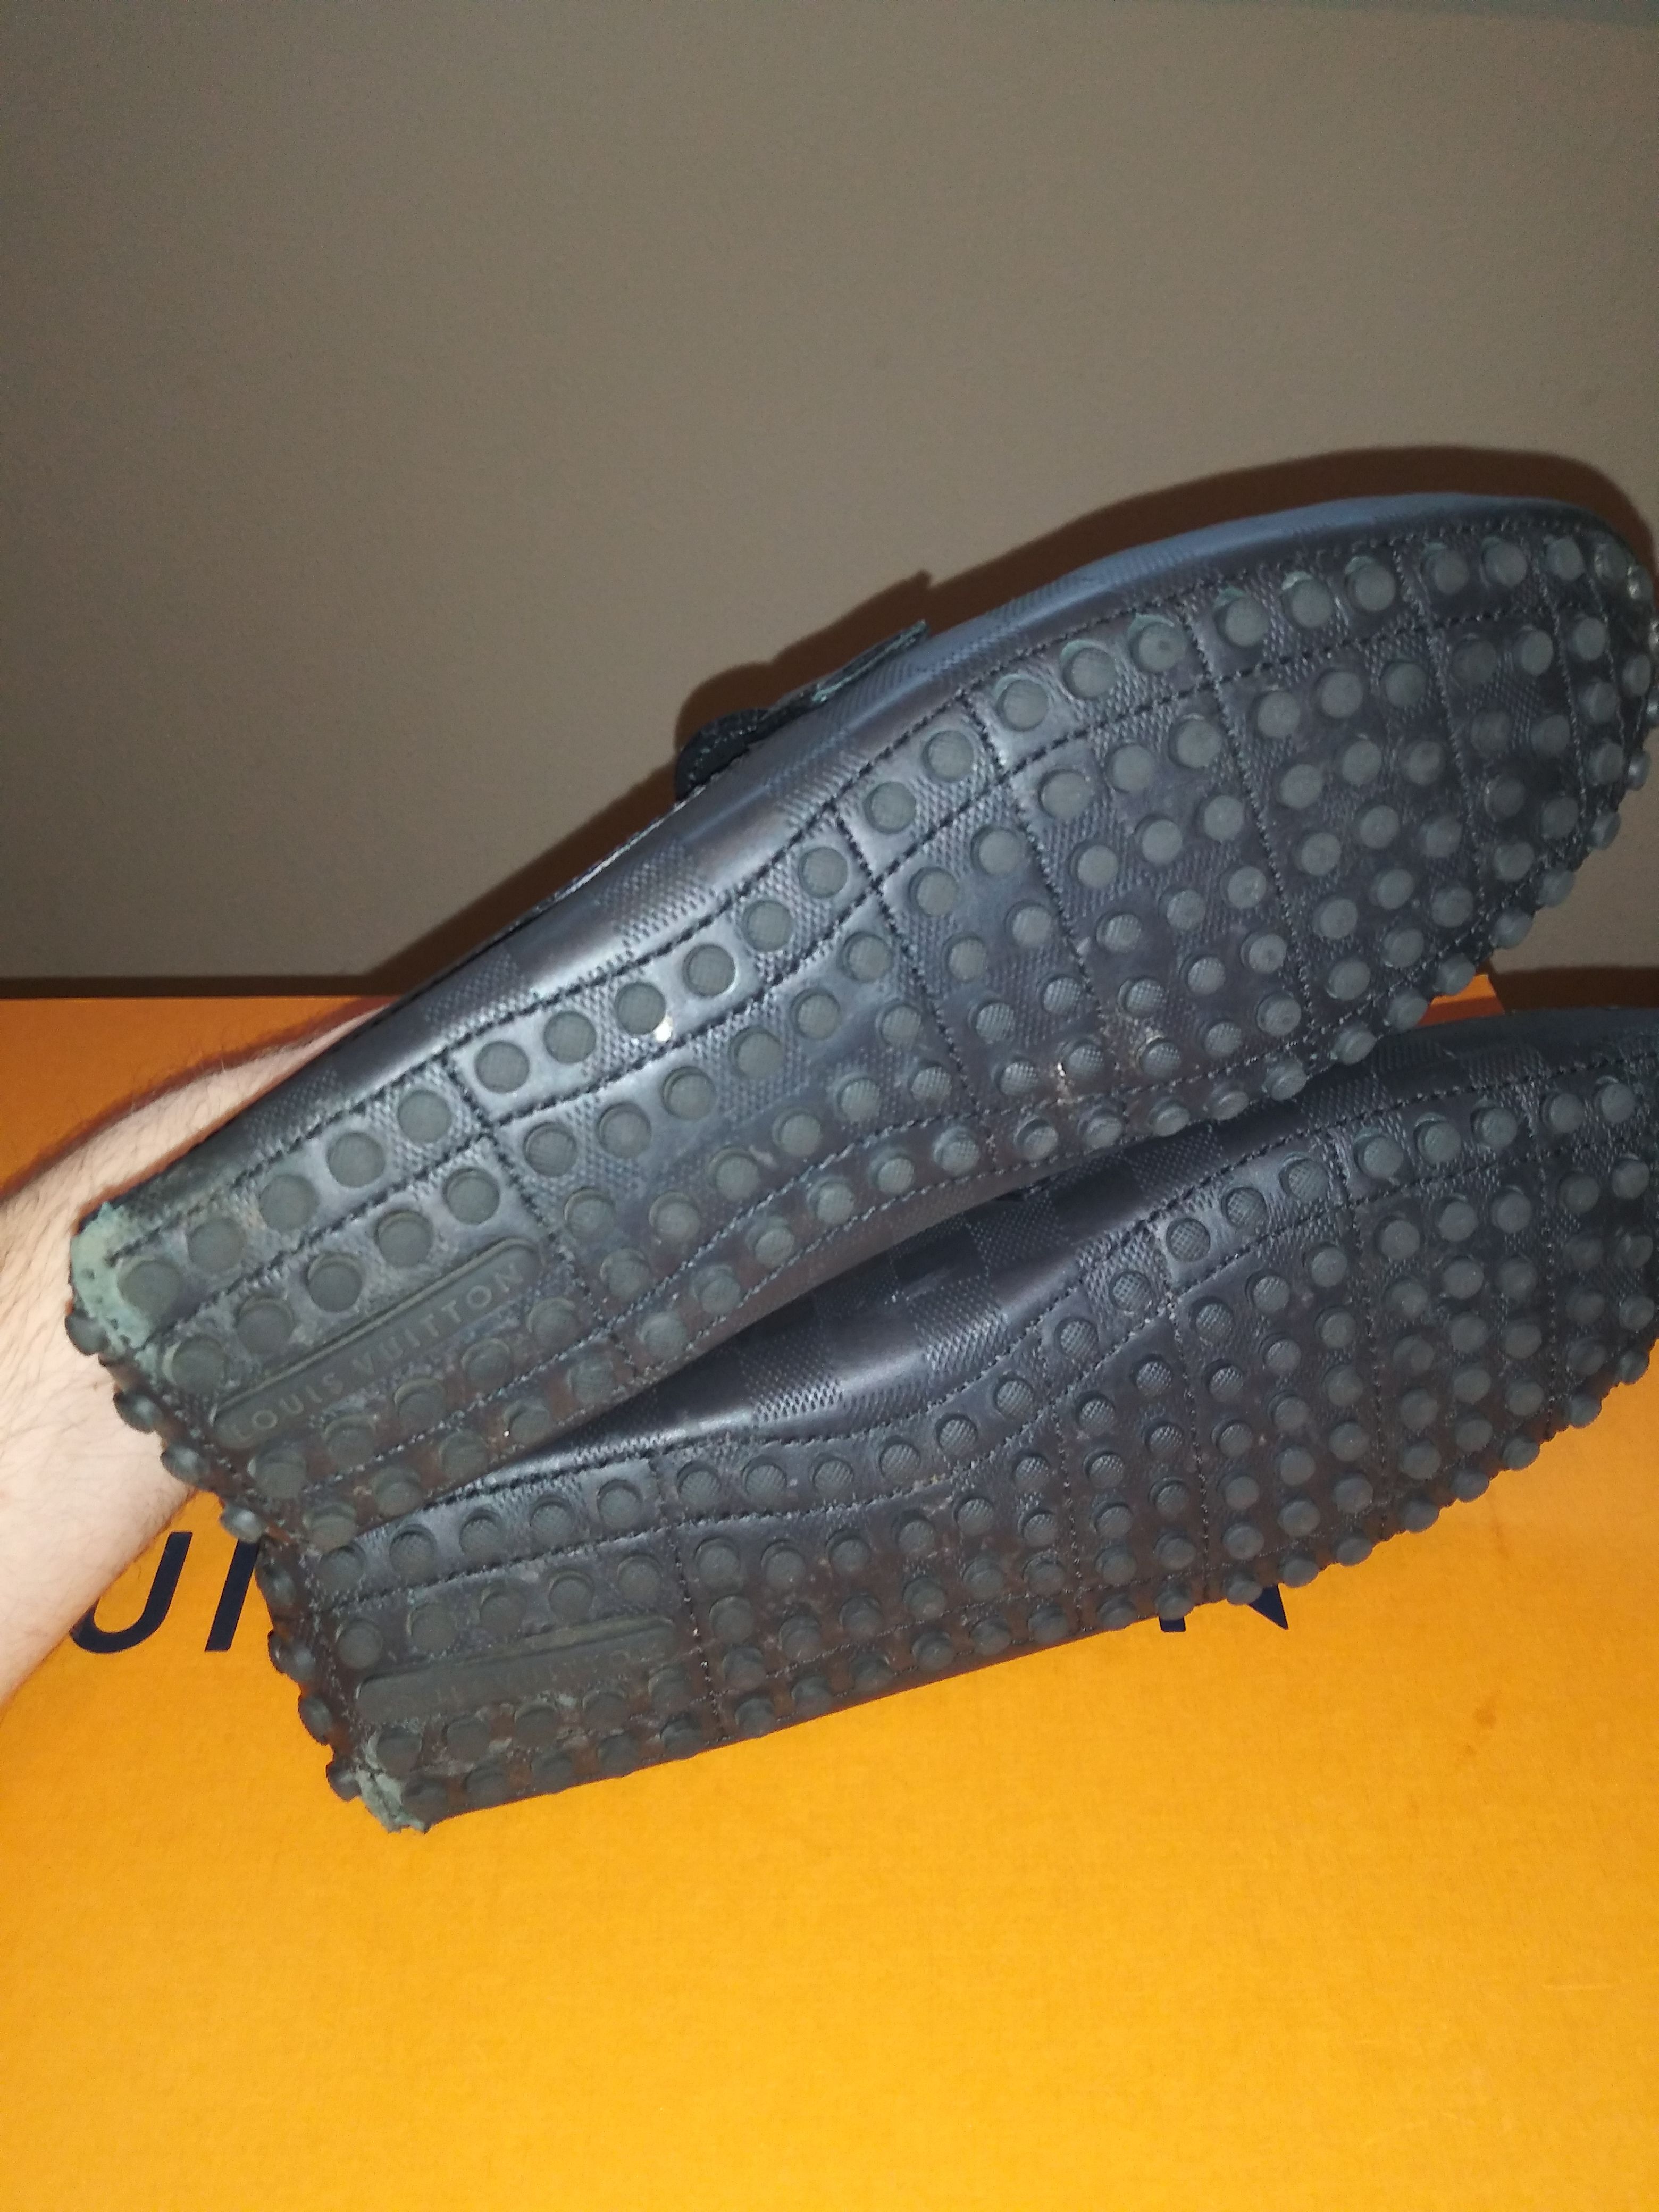 New Men's Louis Vuitton Black Slip On Loafers Shoes for Sale in Windermere,  FL - OfferUp